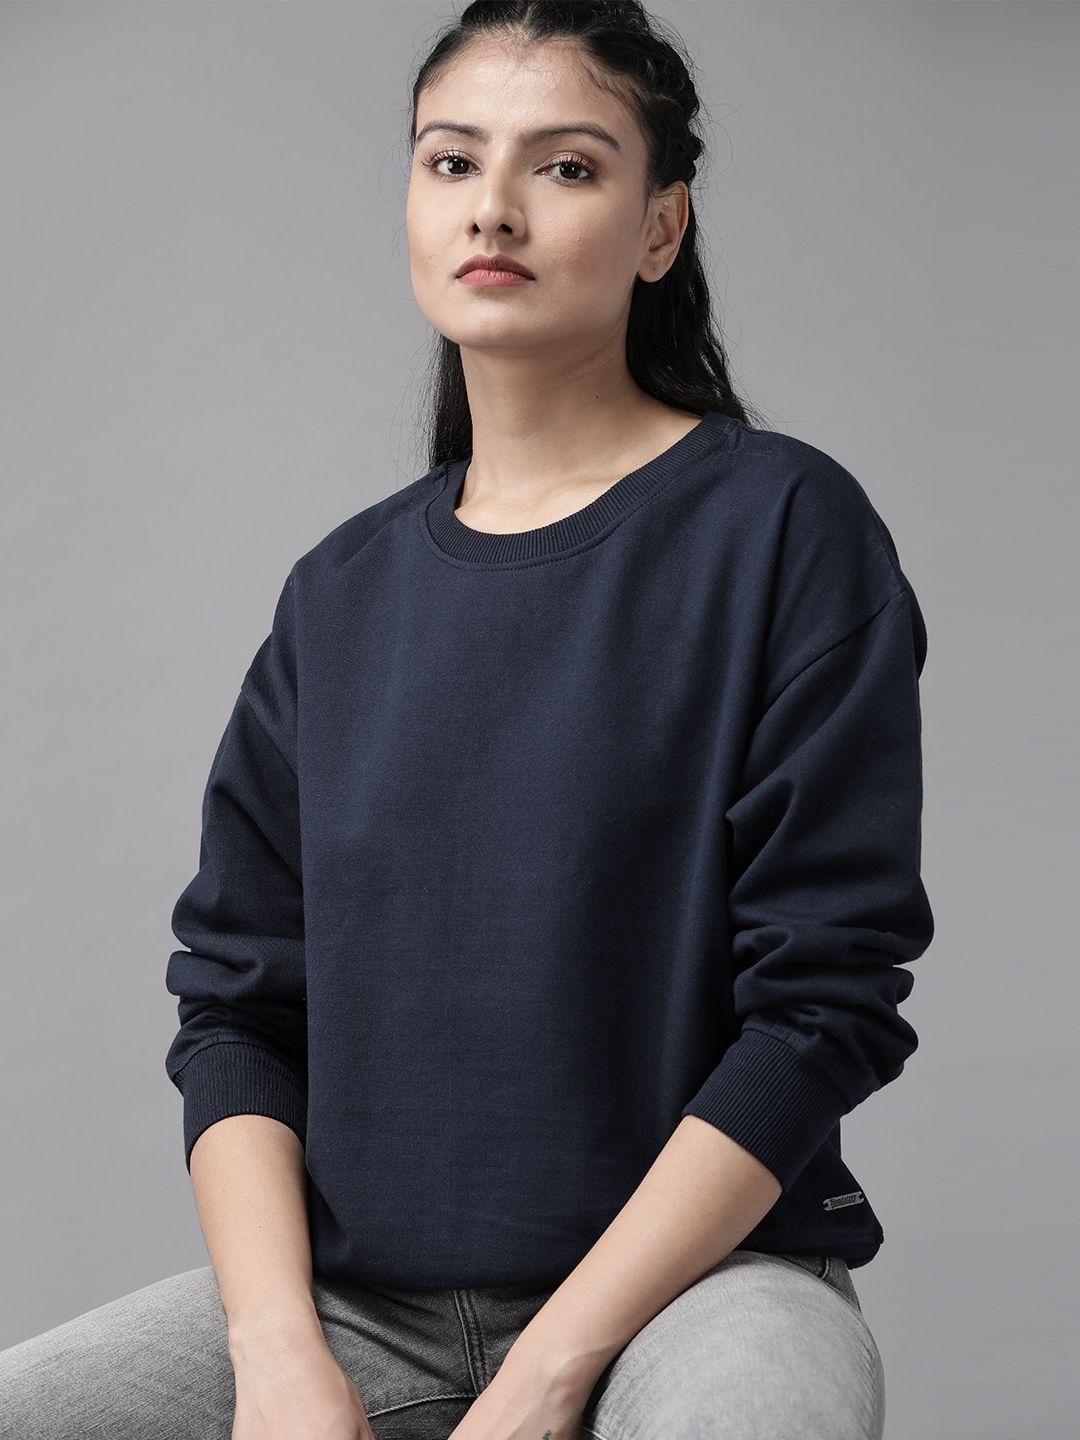 The Roadster Lifestyle Co Women Navy Blue Boxy Fit Solid Sweatshirt